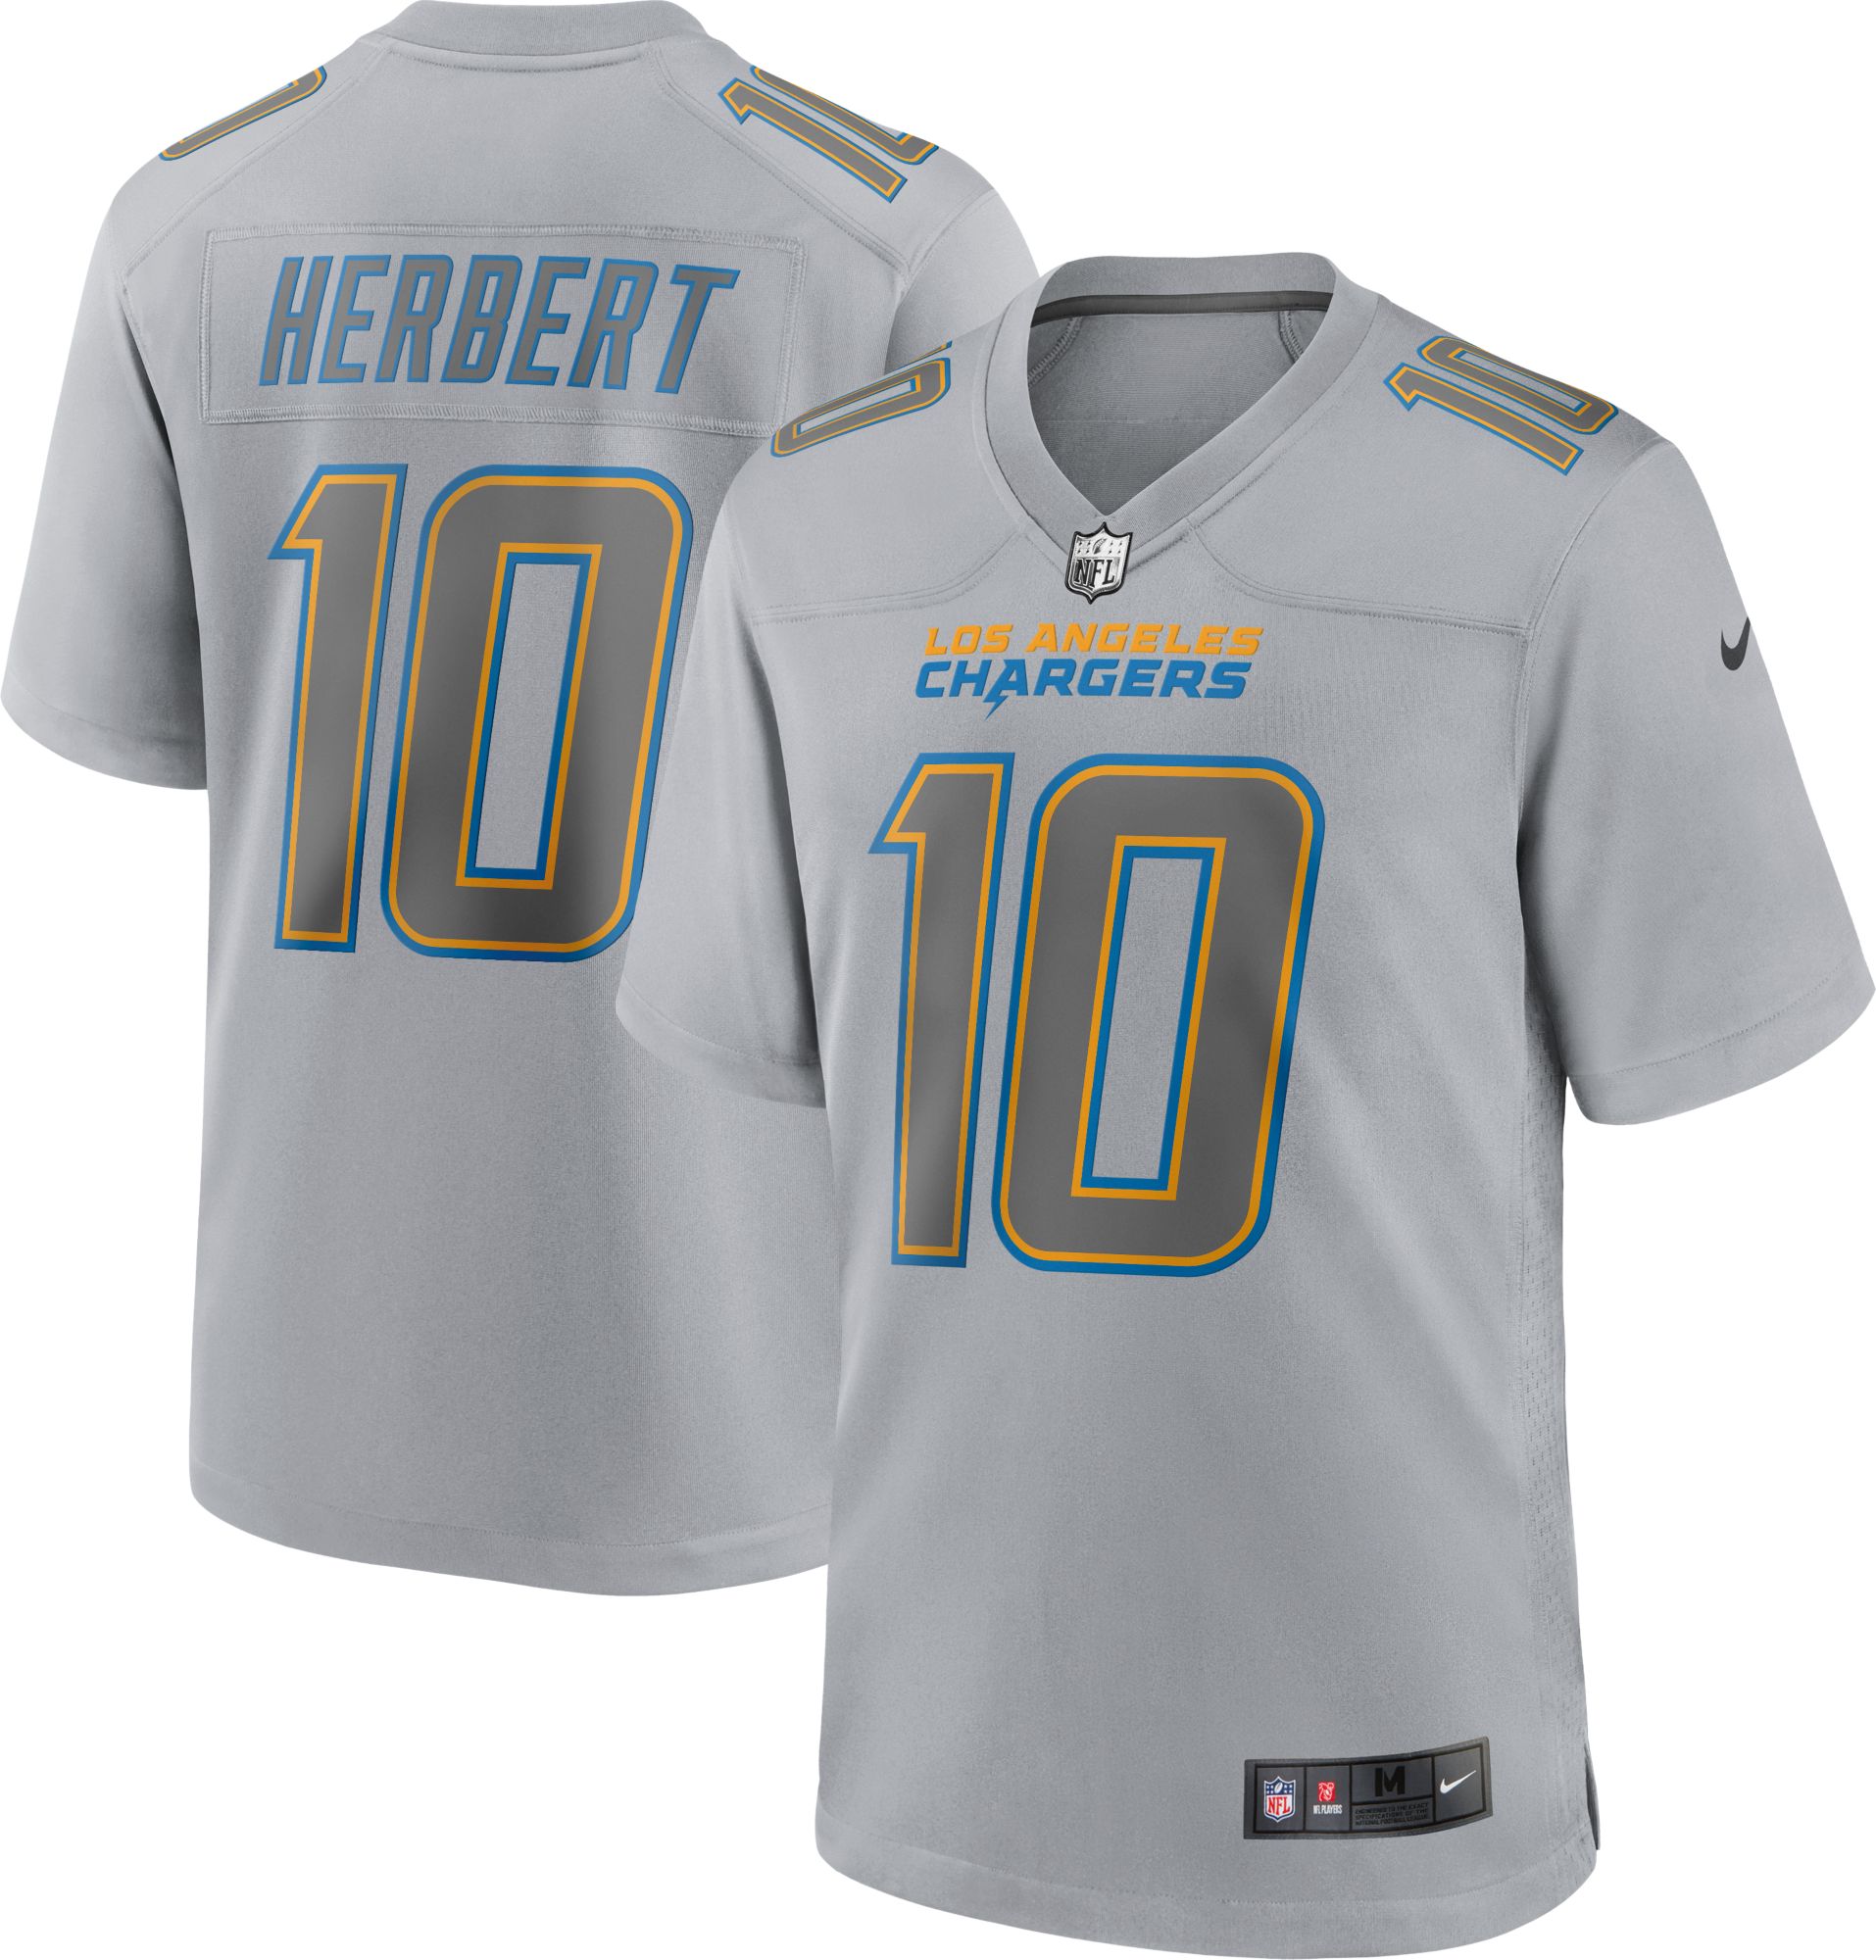 la chargers jersey valley ranch